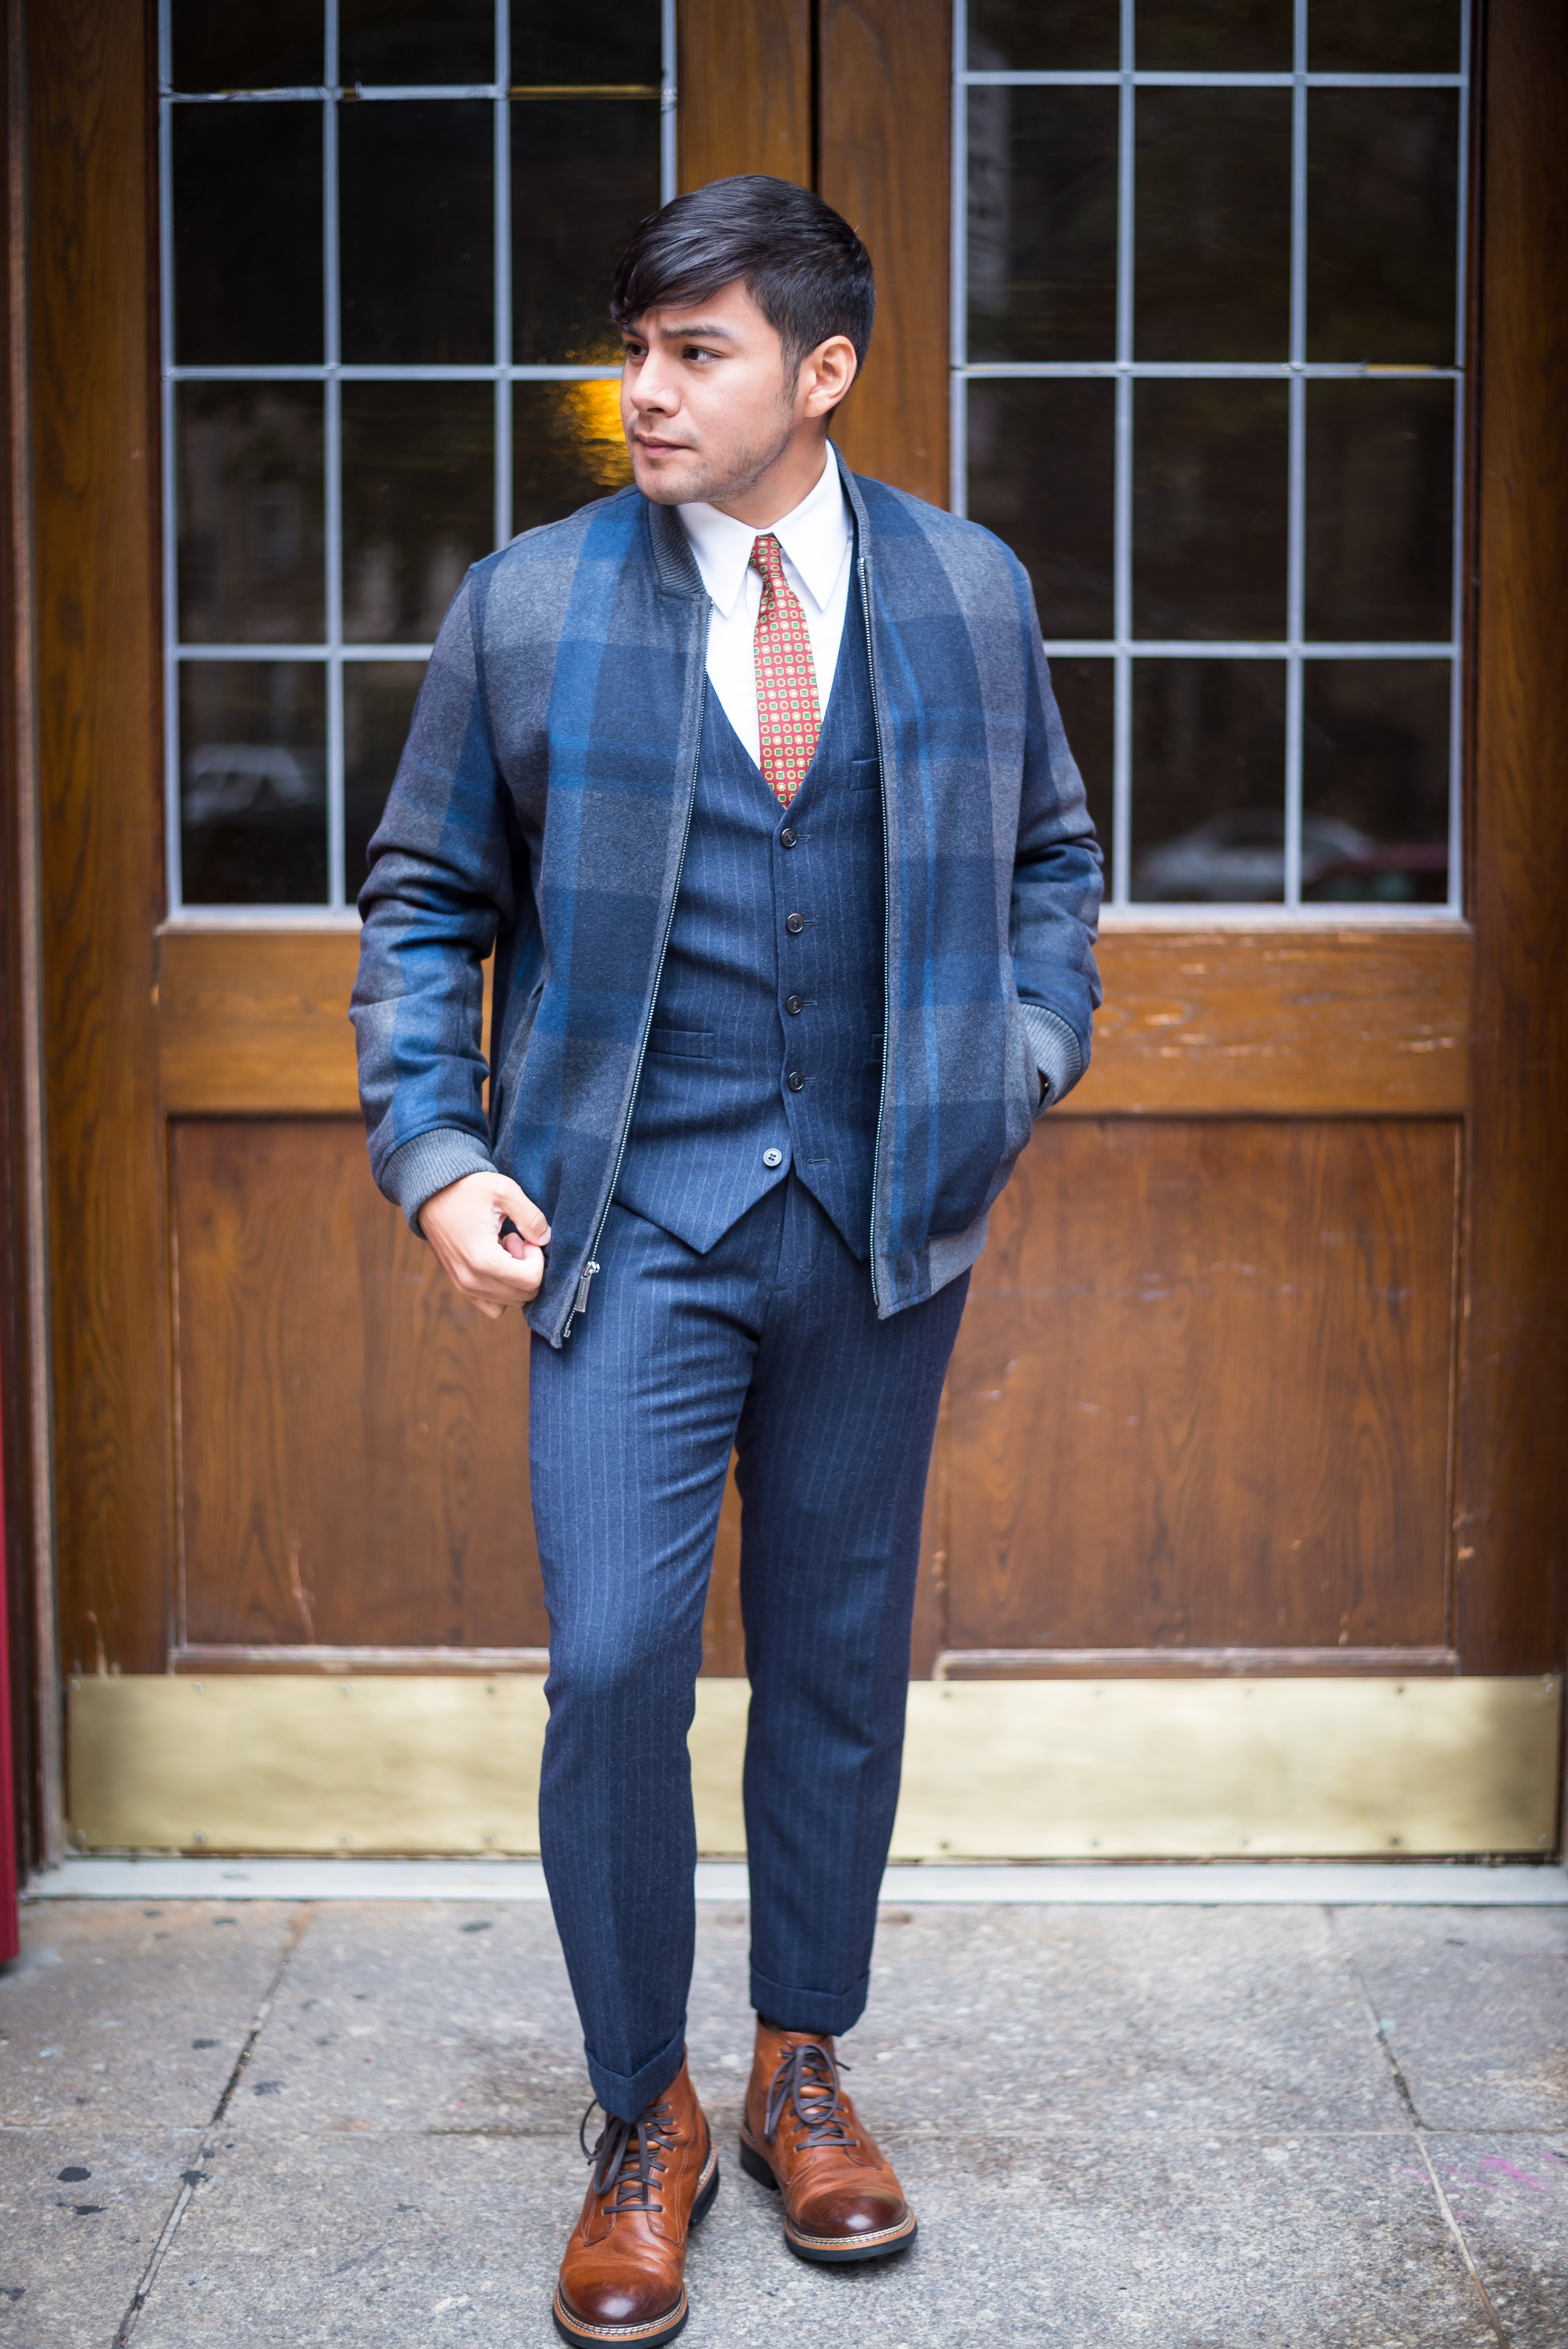 JACKET + SUIT + BOOTS - Dandy In The Bronx